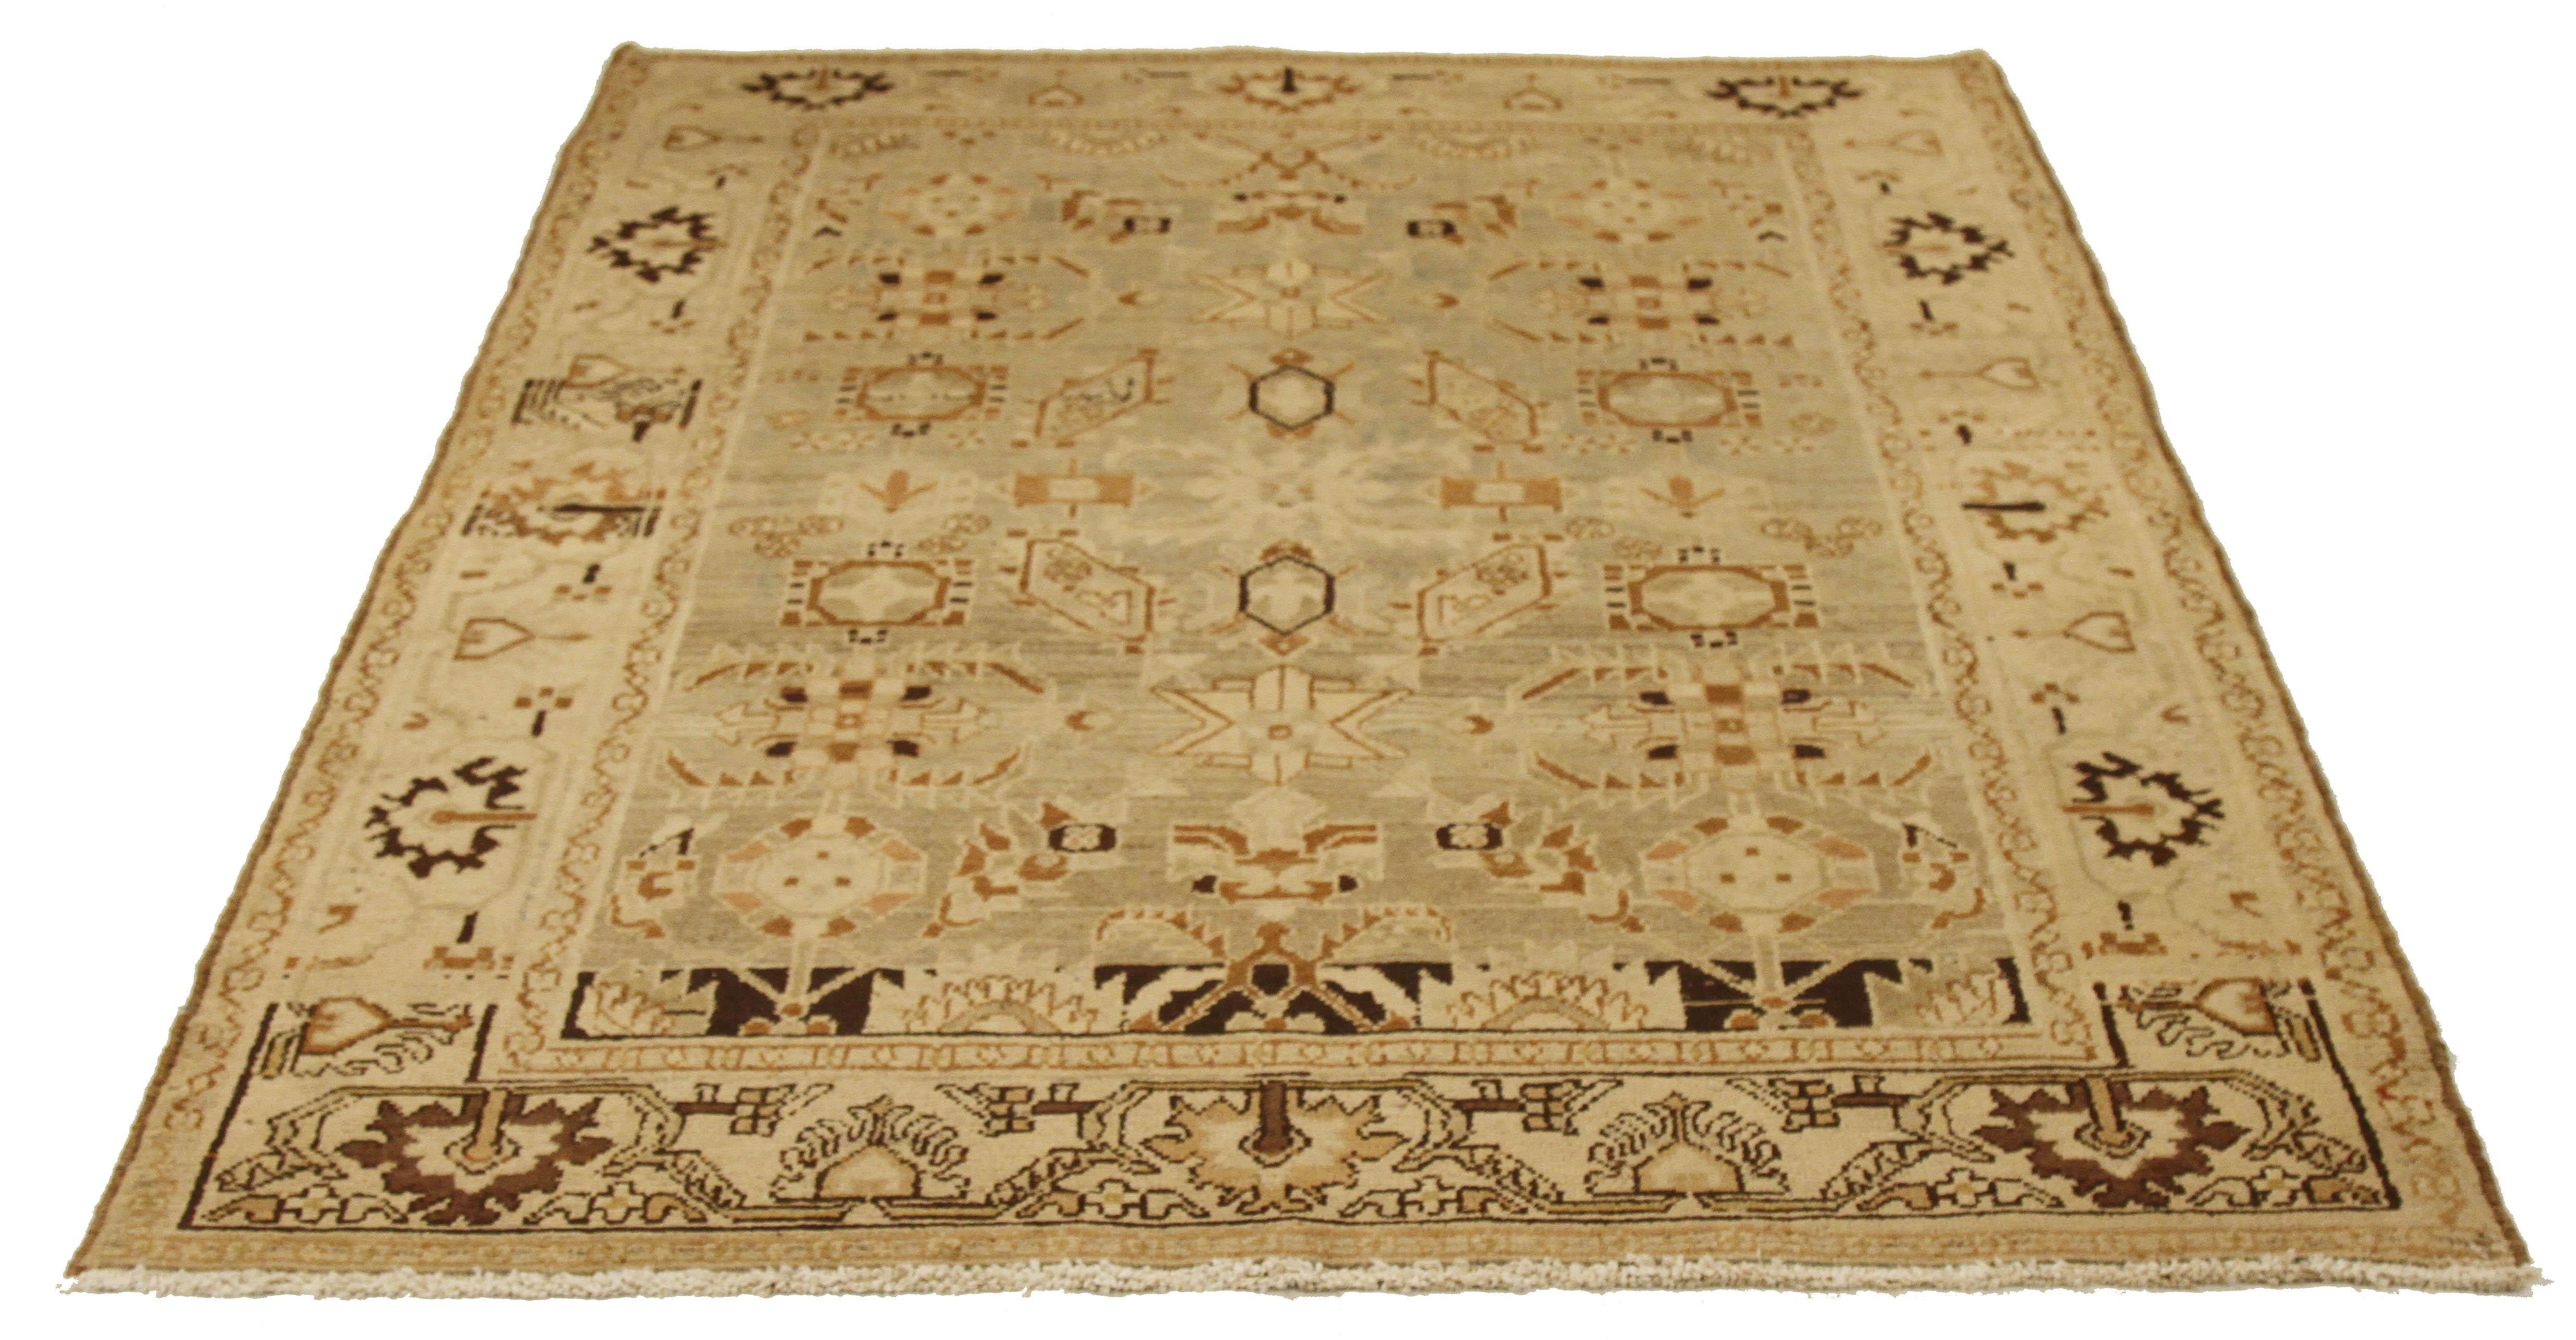 Antique Persian rug handwoven from the finest sheep’s wool and colored with all-natural vegetable dyes that are safe for humans and pets. It’s a traditional Malayer design featuring brown tribal details on an ivory field. It’s a lovely piece to